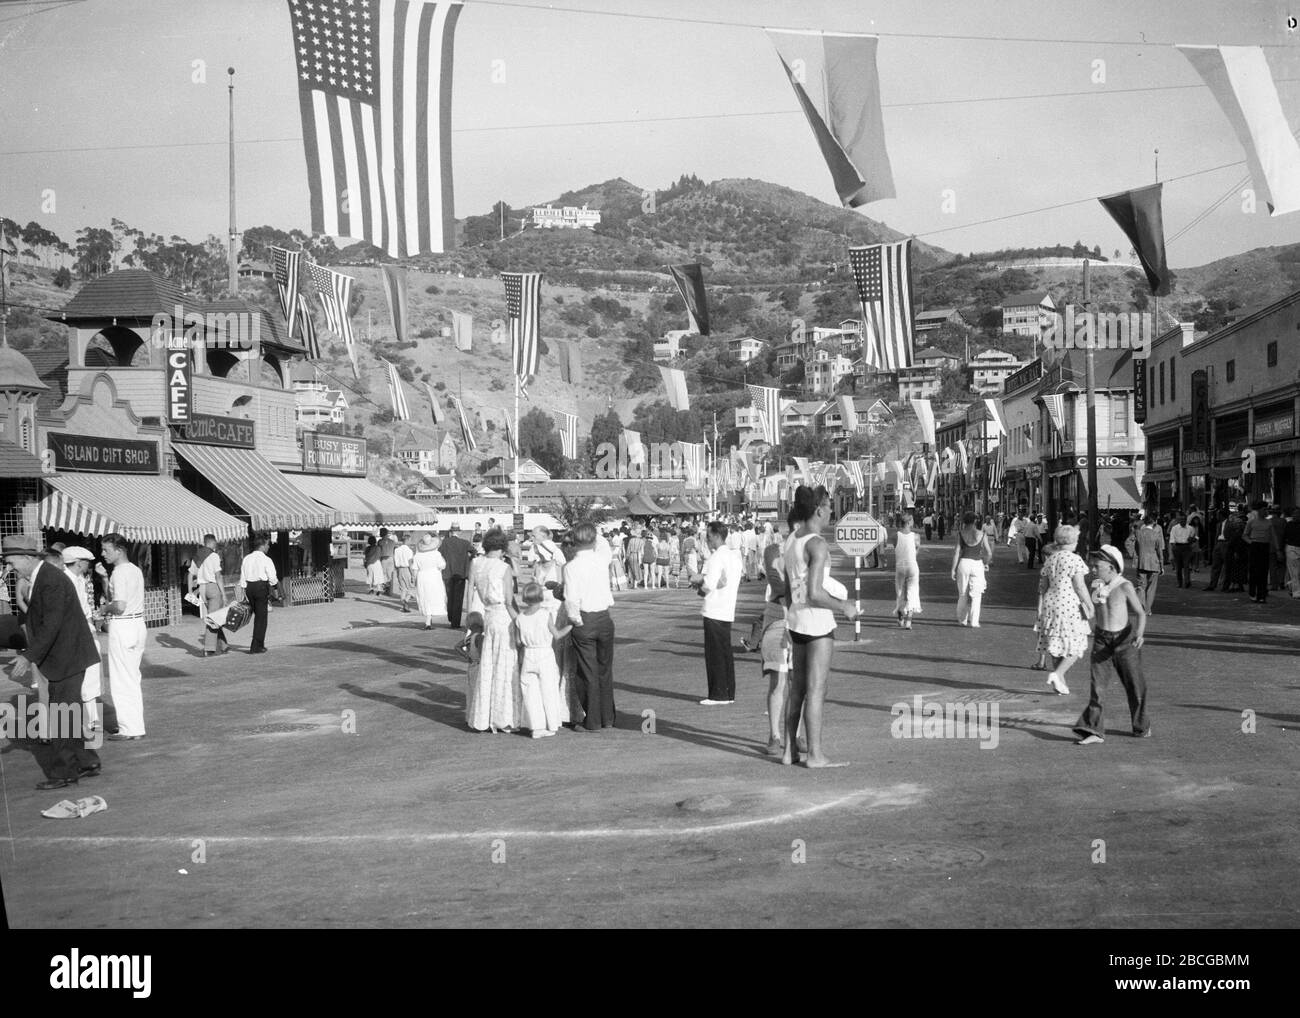 Pedestrians wander around a wide street closed to vehicle traffic, possibly Crescent Avenue, in Avalon, Santa Catalina Island, California, 1931. Cafés and storefronts are seen to the left and right, flags are suspended overhead and hillside houses are seen in the distance. Photography by Burton Holmes Stock Photo